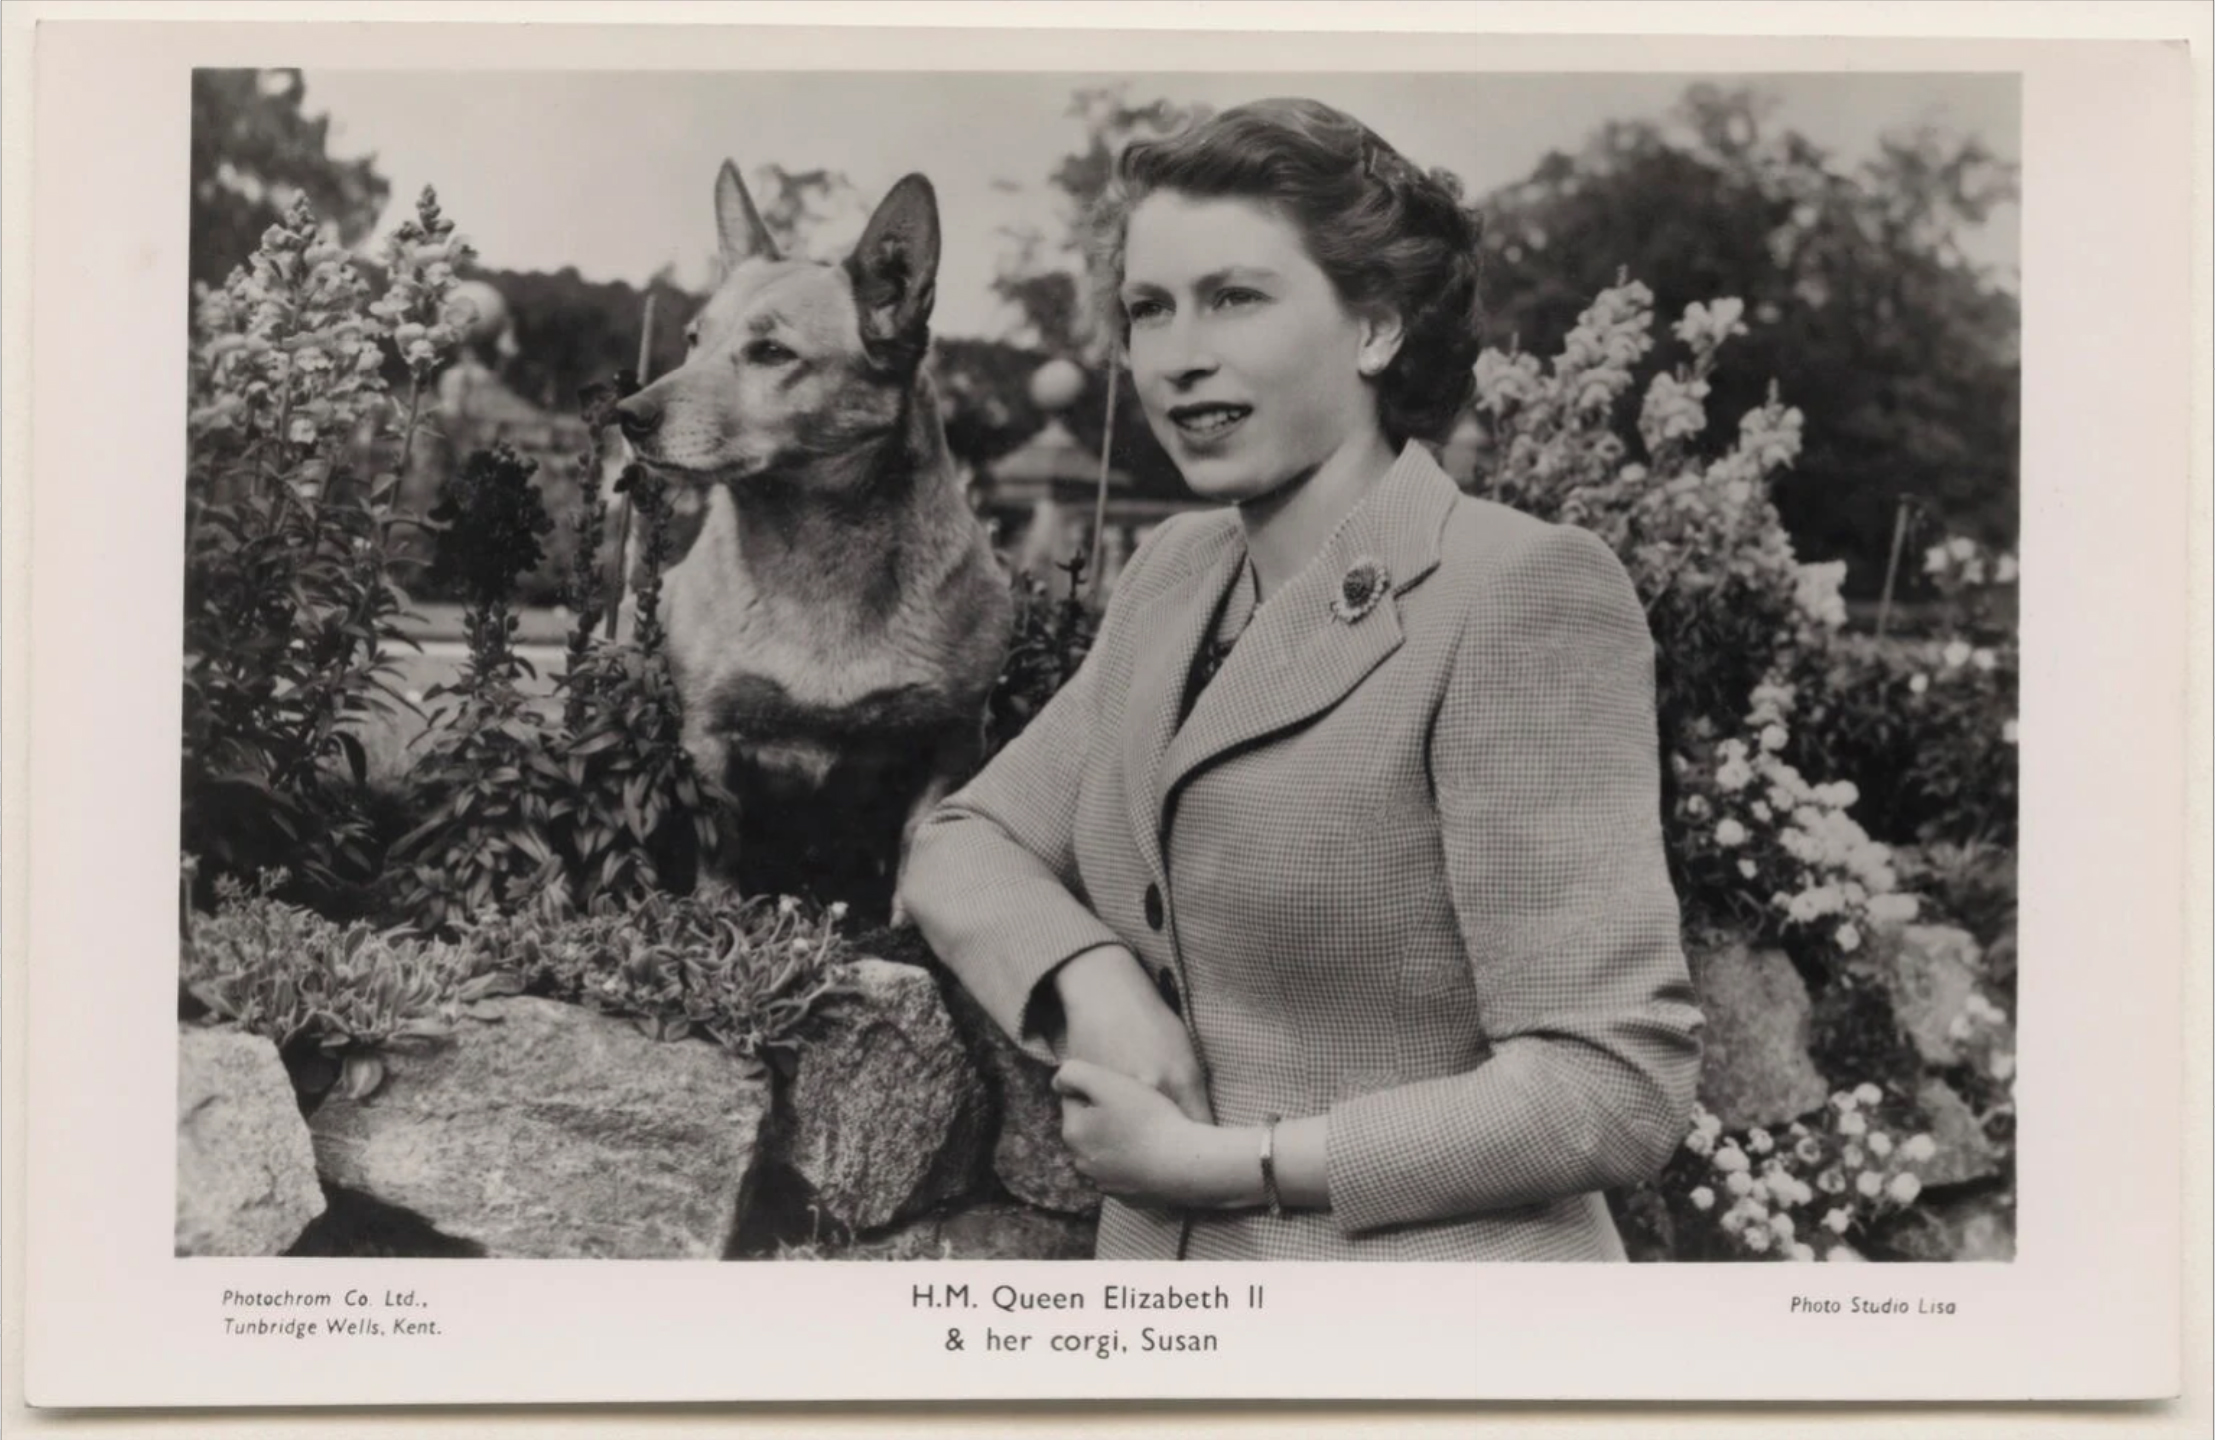 Queen Elizabeth II and her first welsh pembroke corgi, Susan - the perfect candidates for a pet trust.